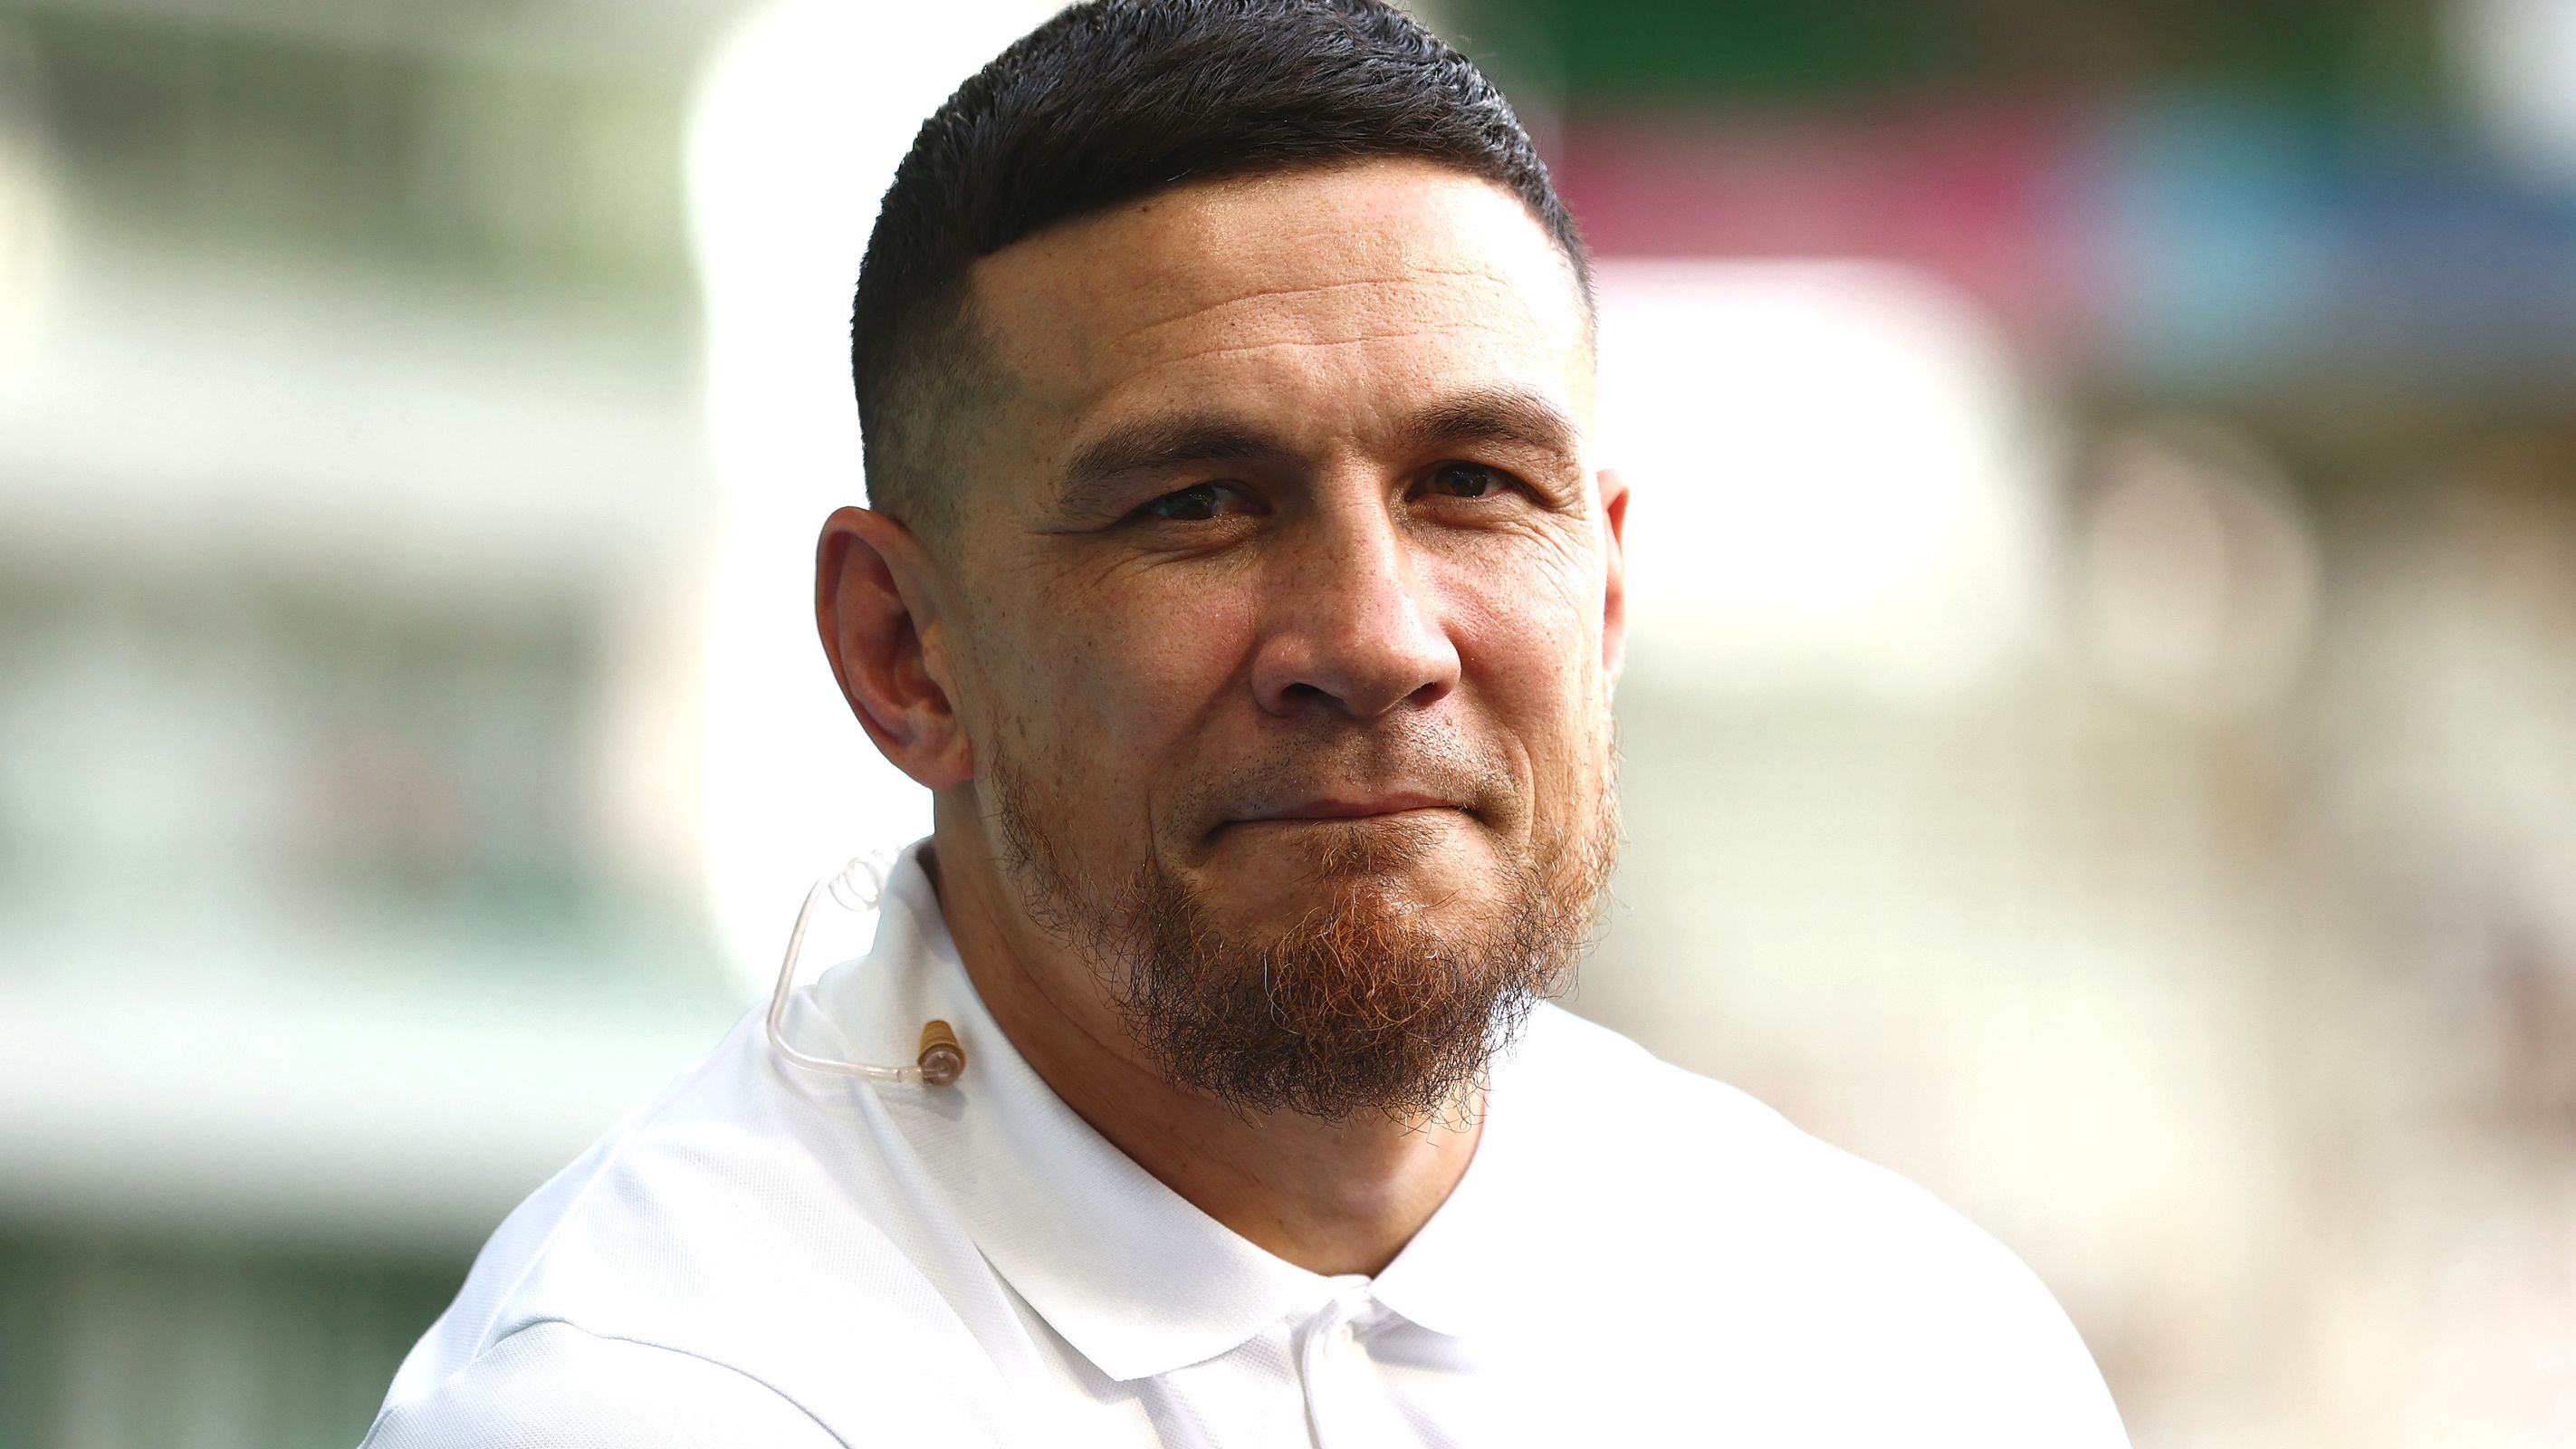 Former player Sonny Bill Williams during the Rugby World Cup France 2023 match between Australia and Fiji.